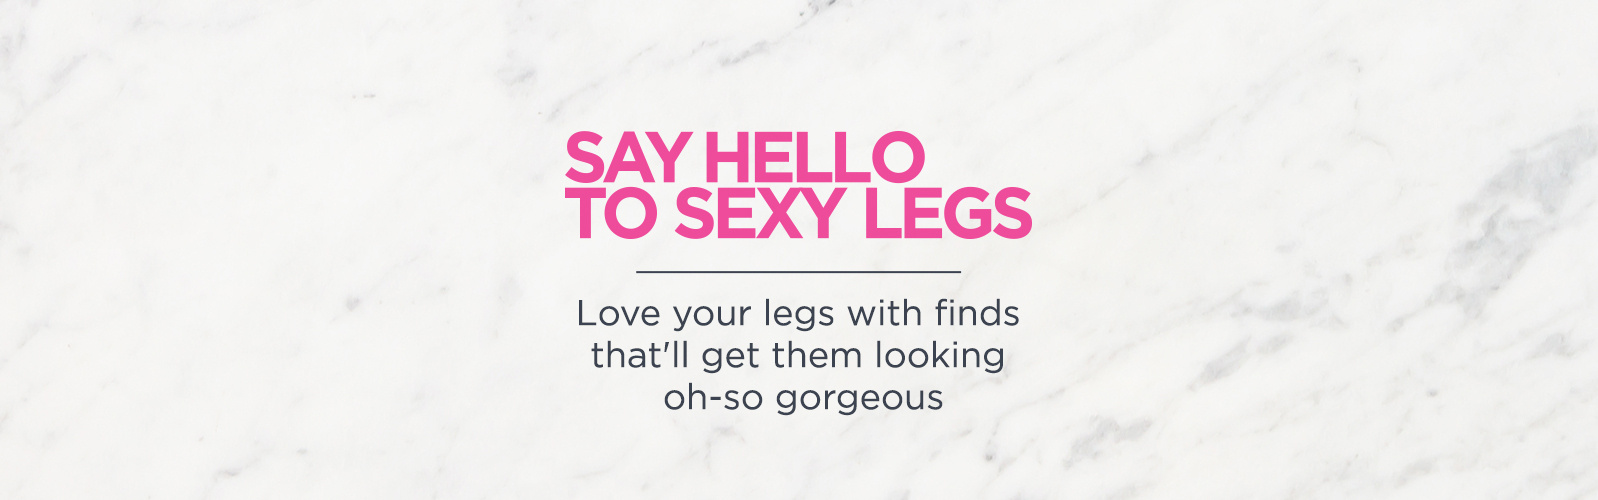 Say Hello to Sexy Legs Love your legs with finds that'll get them looking oh-so gorgeous